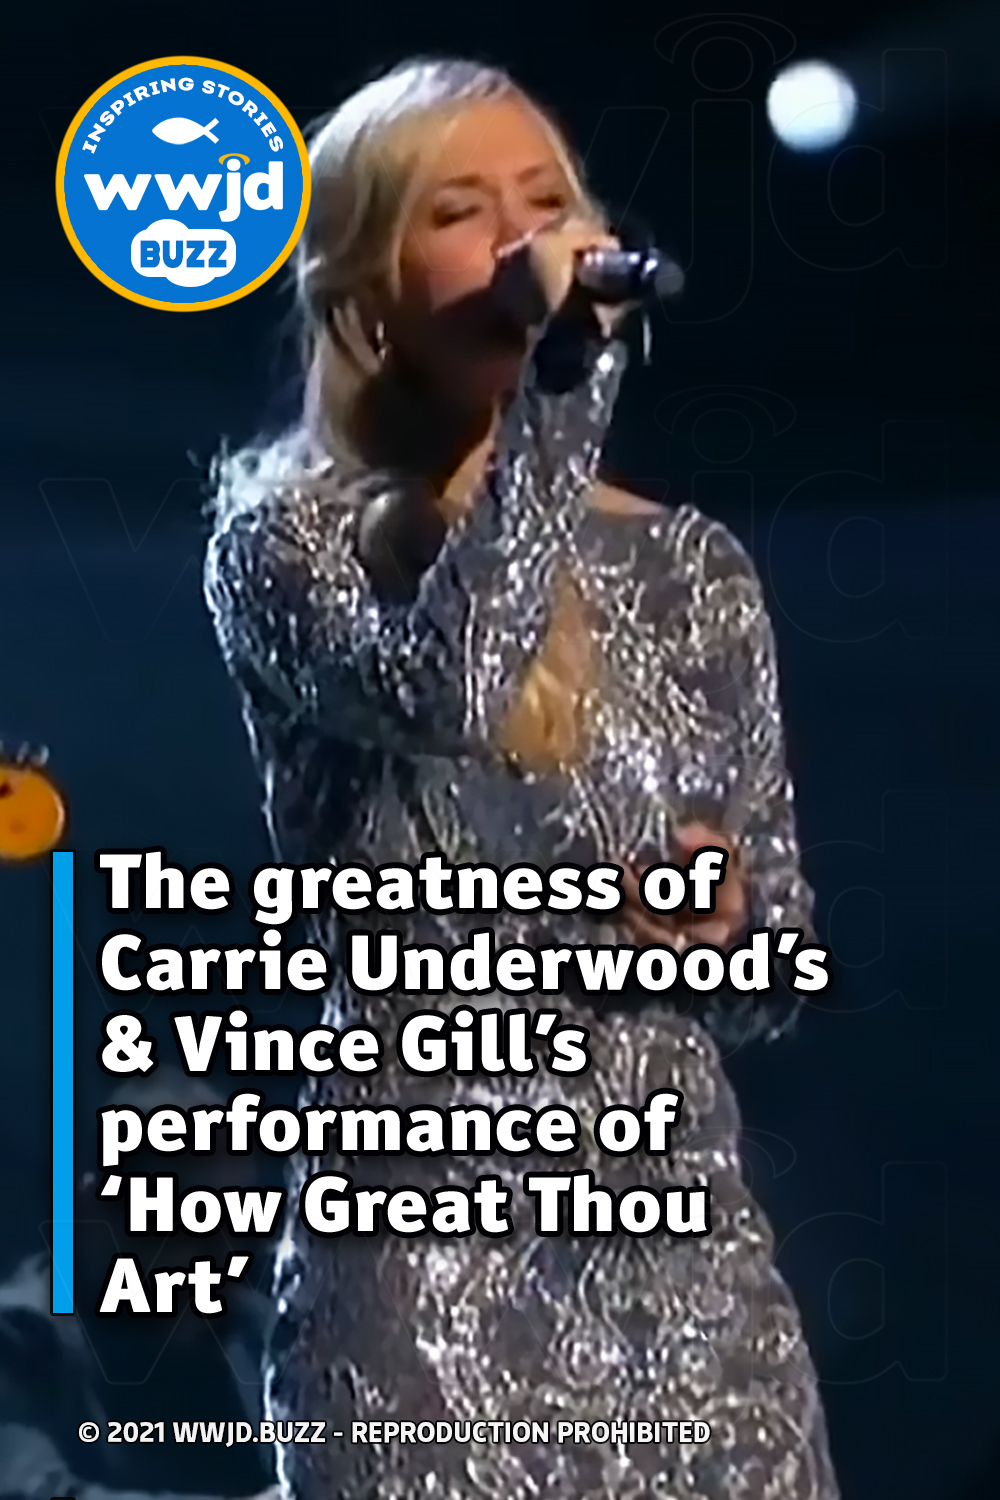 The greatness of Carrie Underwood’s & Vince Gill’s performance of ‘How Great Thou Art’